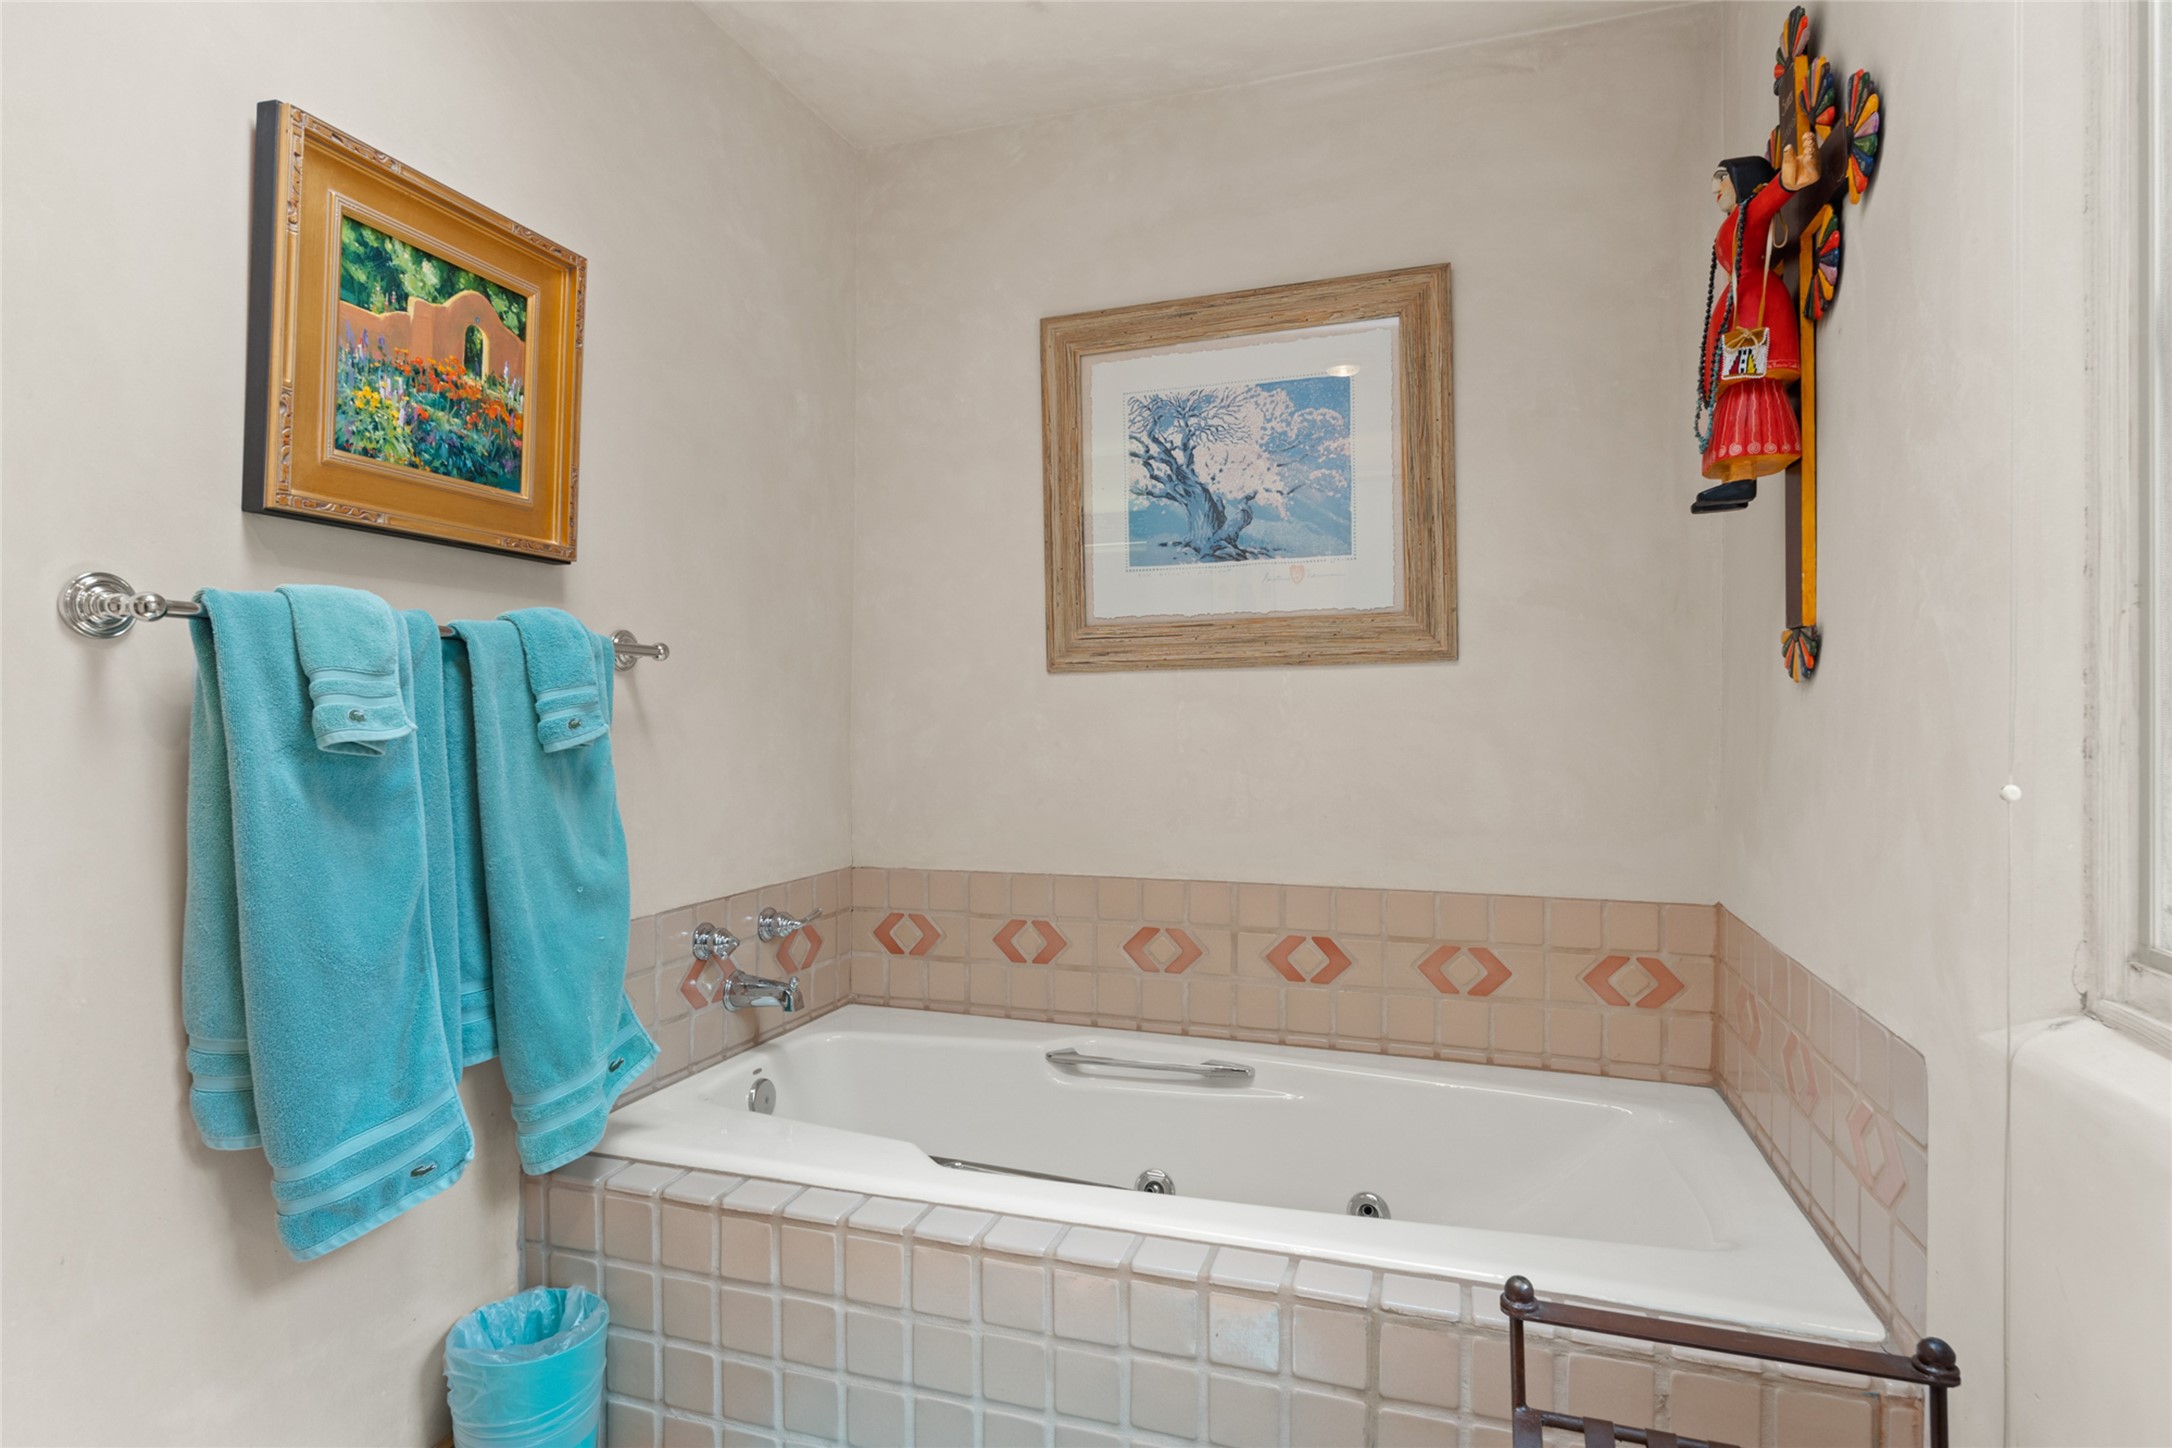 3101 Old Pecos Trail 673, Santa Fe, New Mexico 87505, 2 Bedrooms Bedrooms, ,2 BathroomsBathrooms,Residential,For Sale,3101 Old Pecos Trail 673,202401294